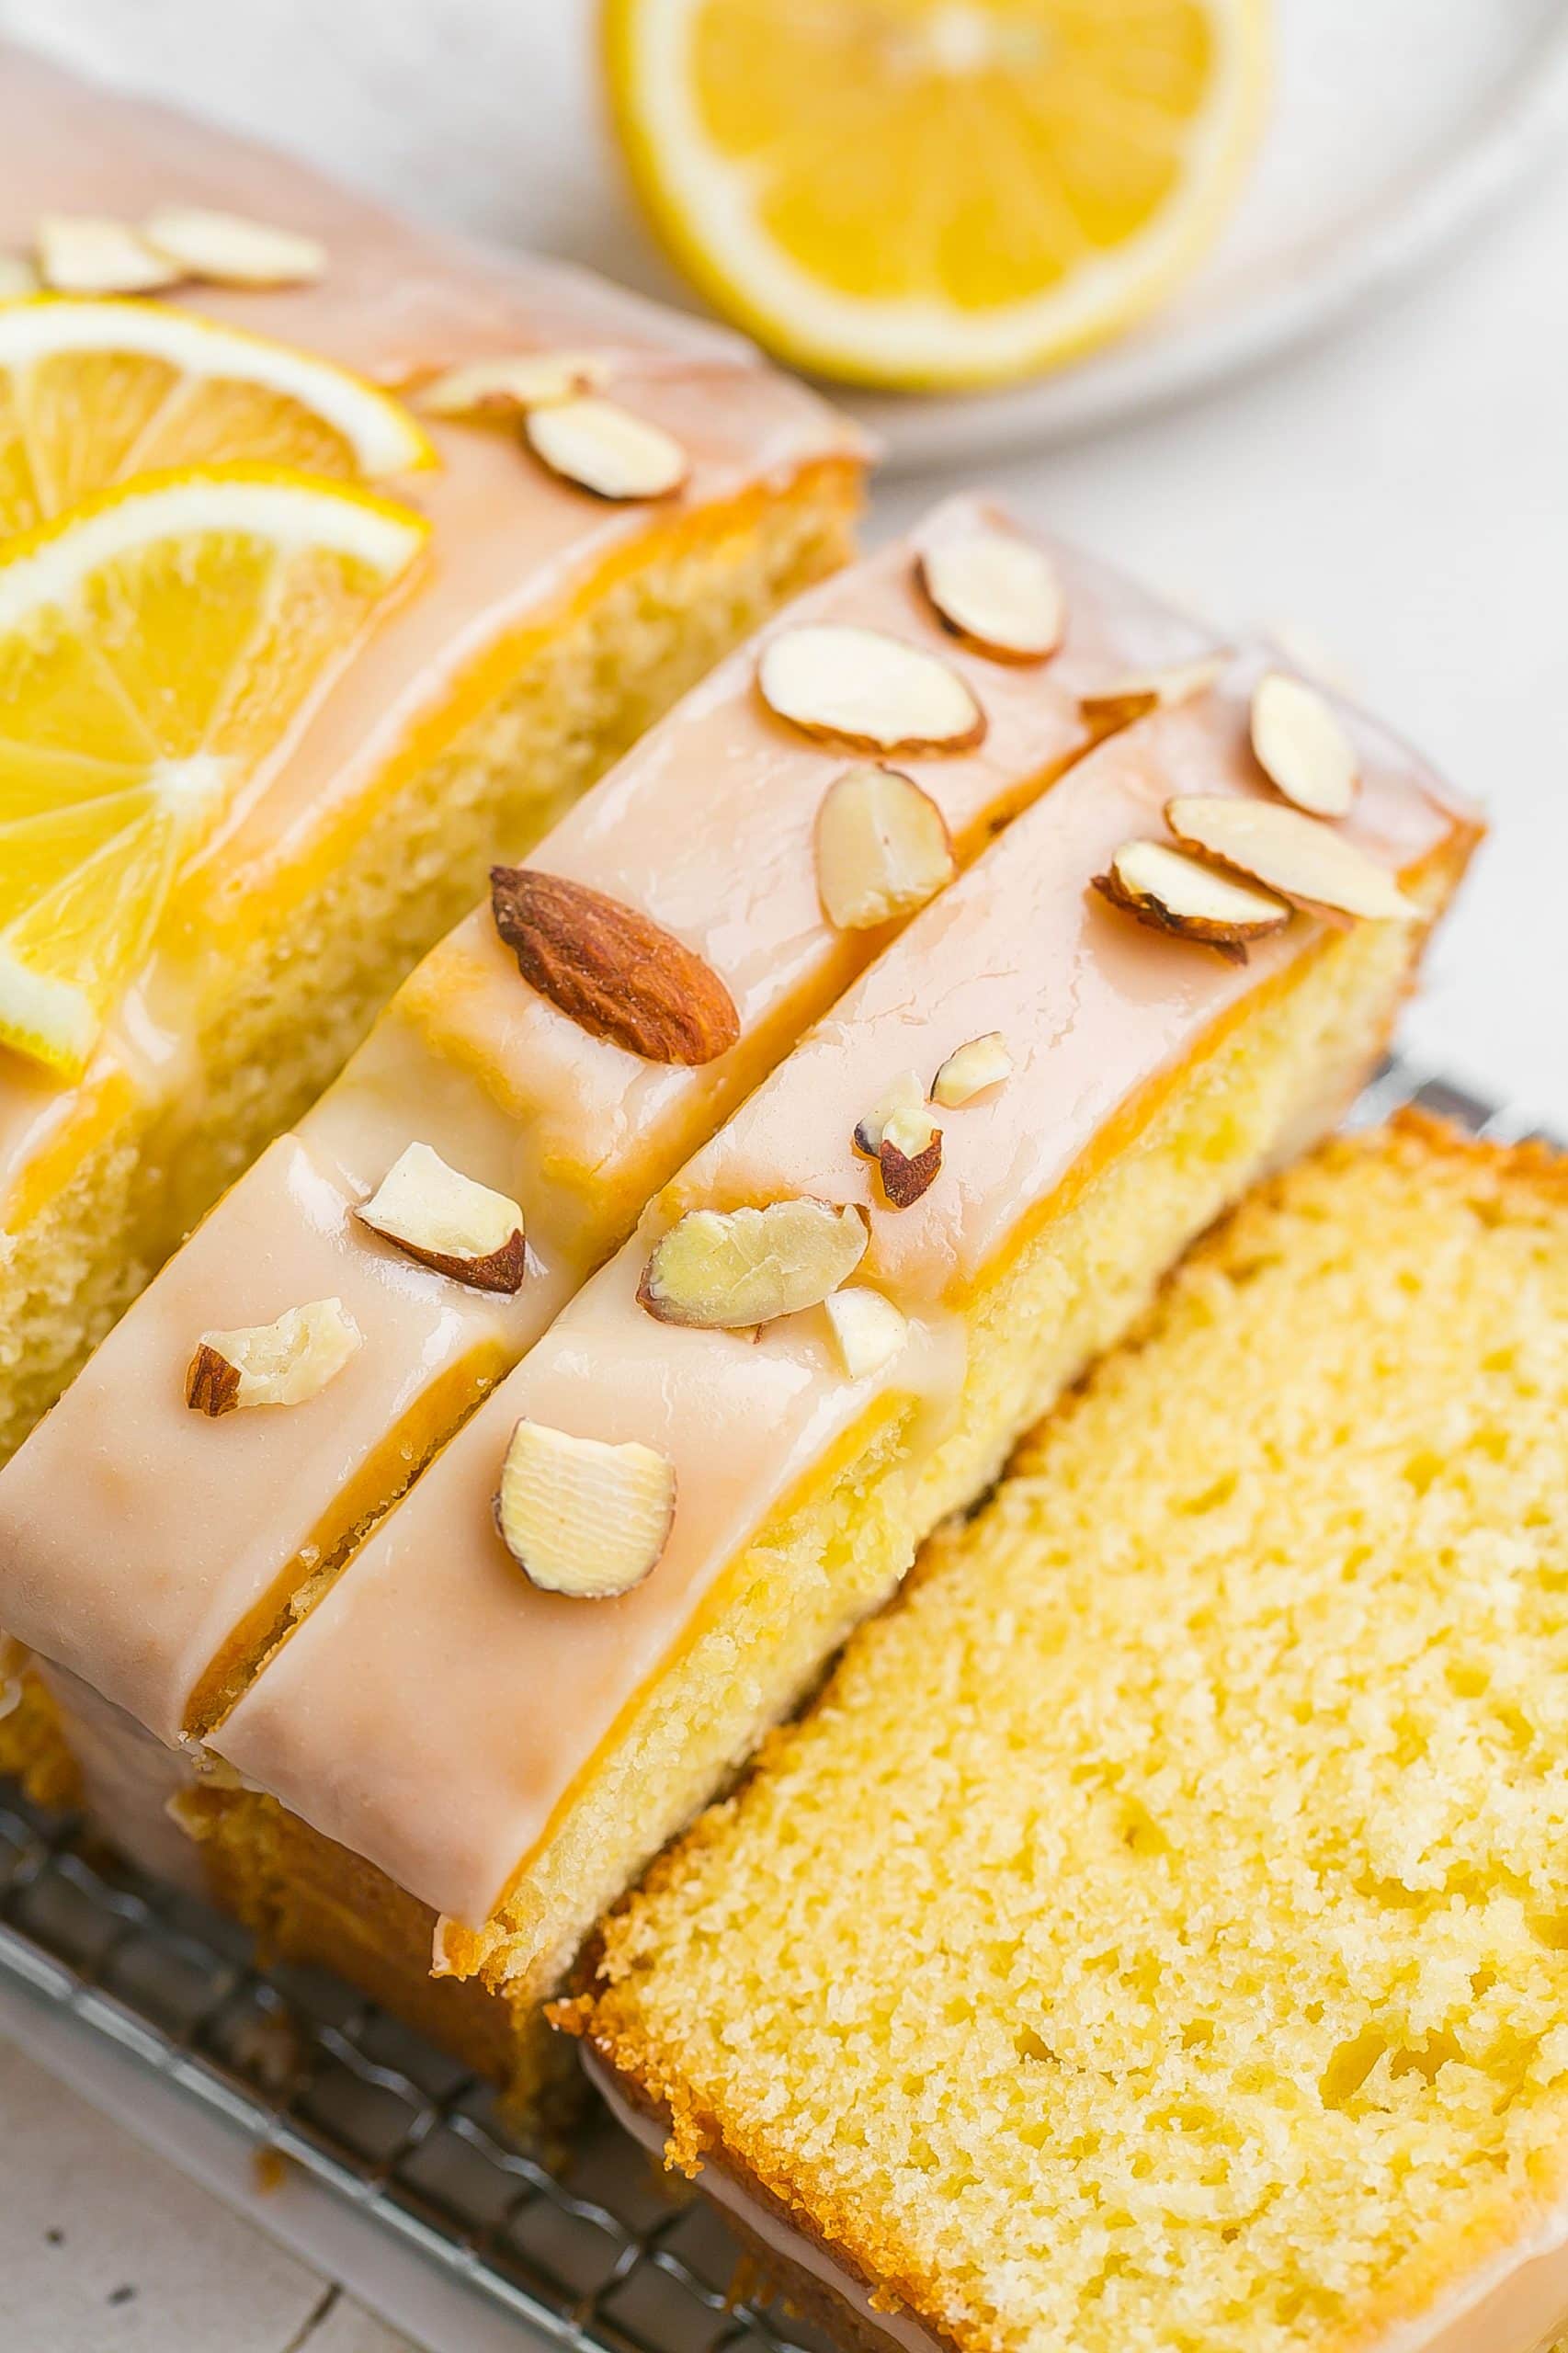 Side view of sliced cake with almonds on top.